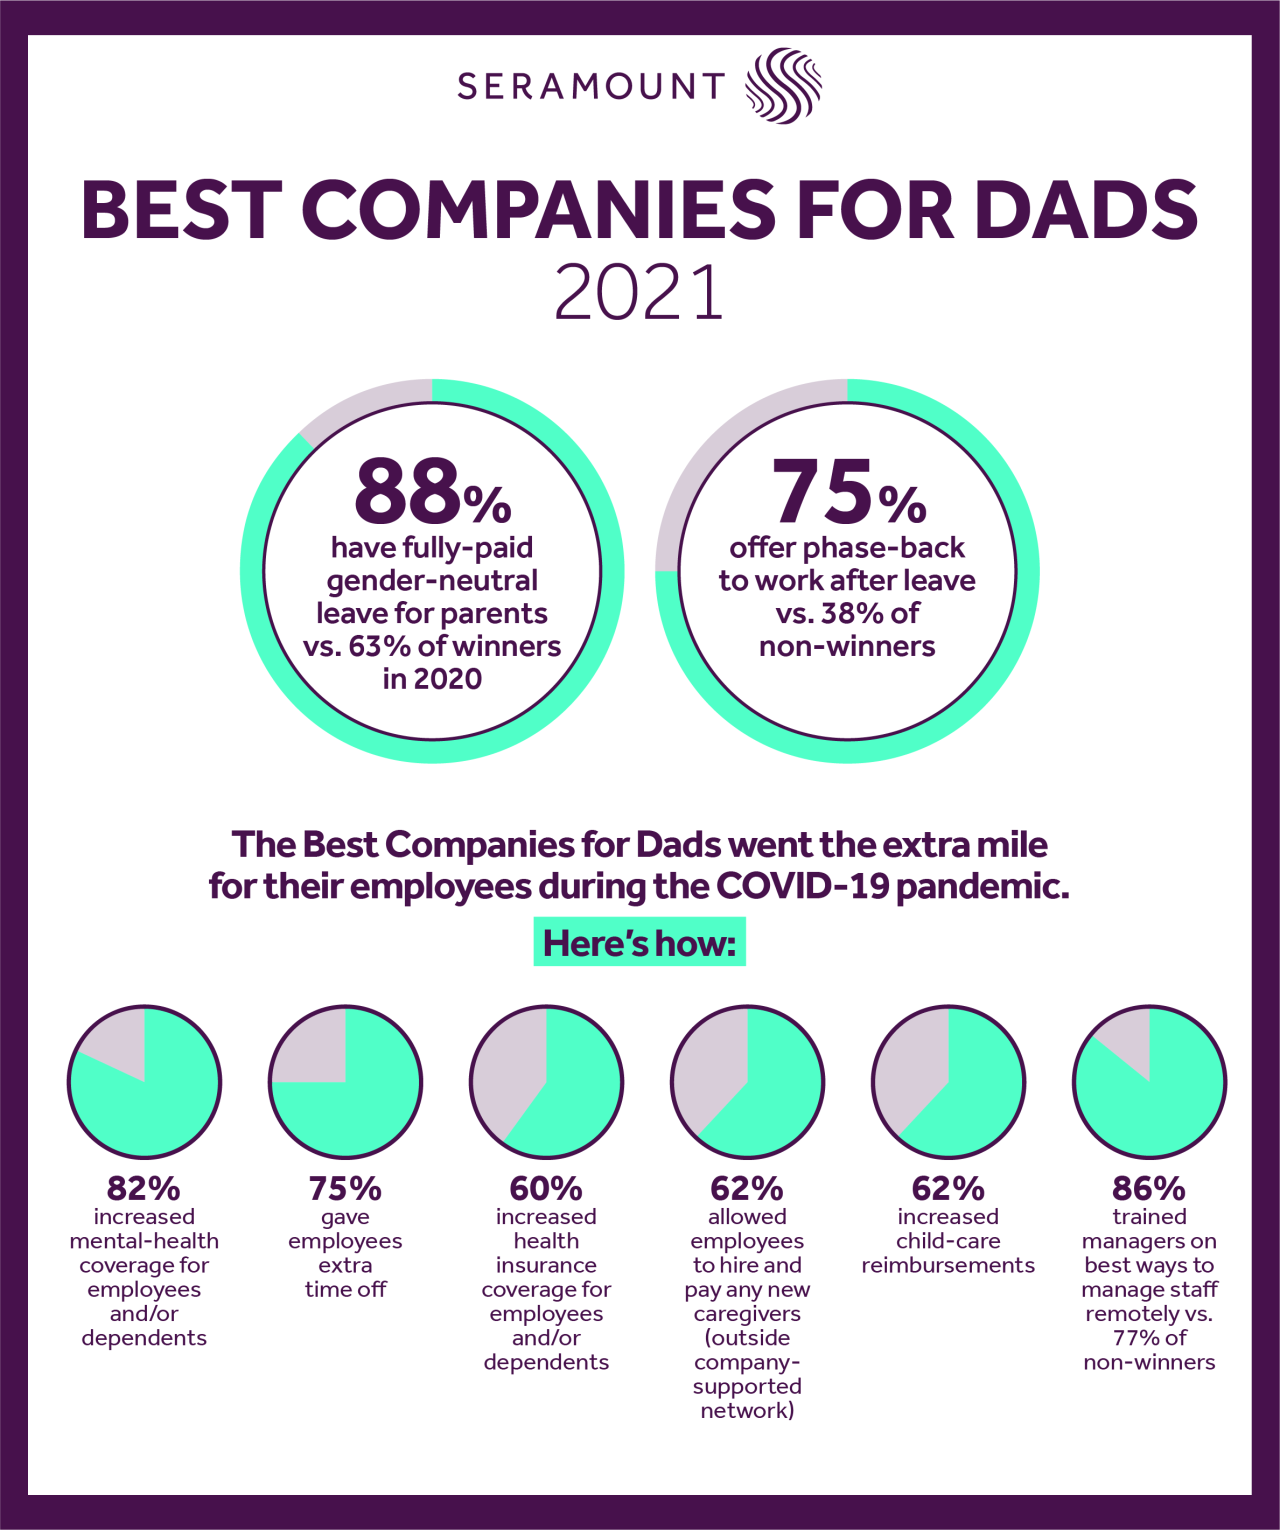 Best company for dads 2021 infographic